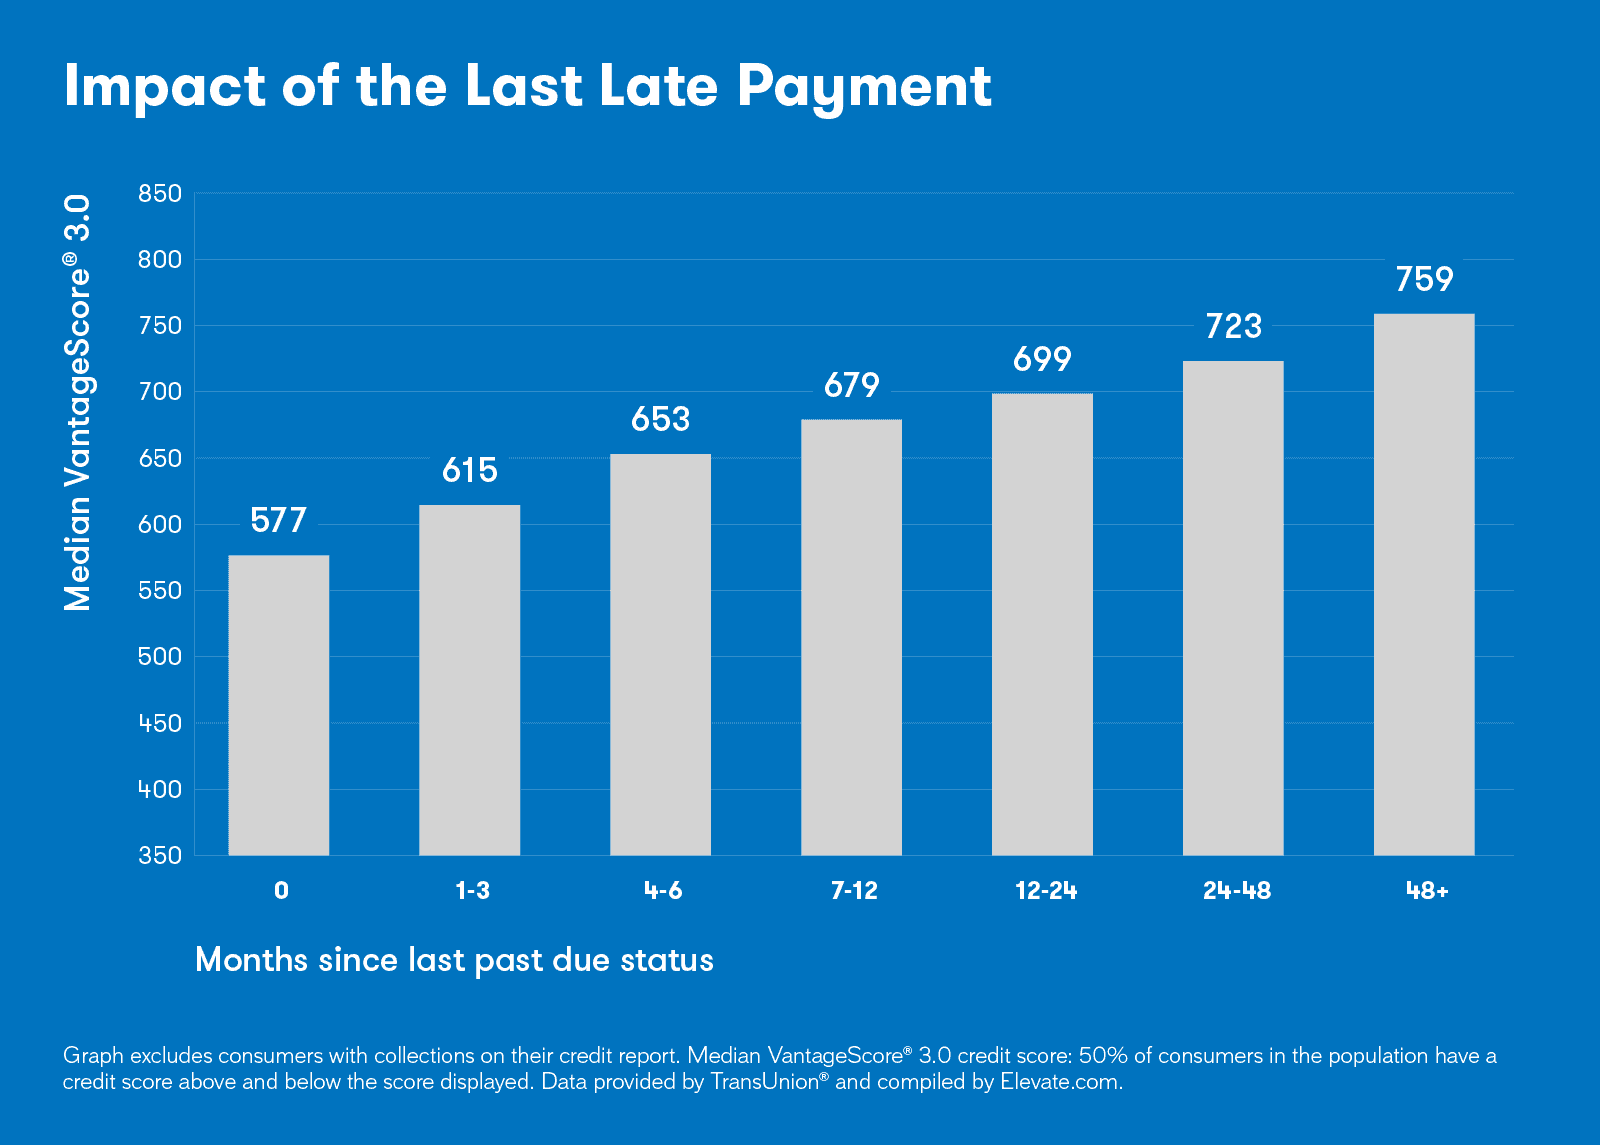 Graph showing the impact that a late payment has on your credit score over time.